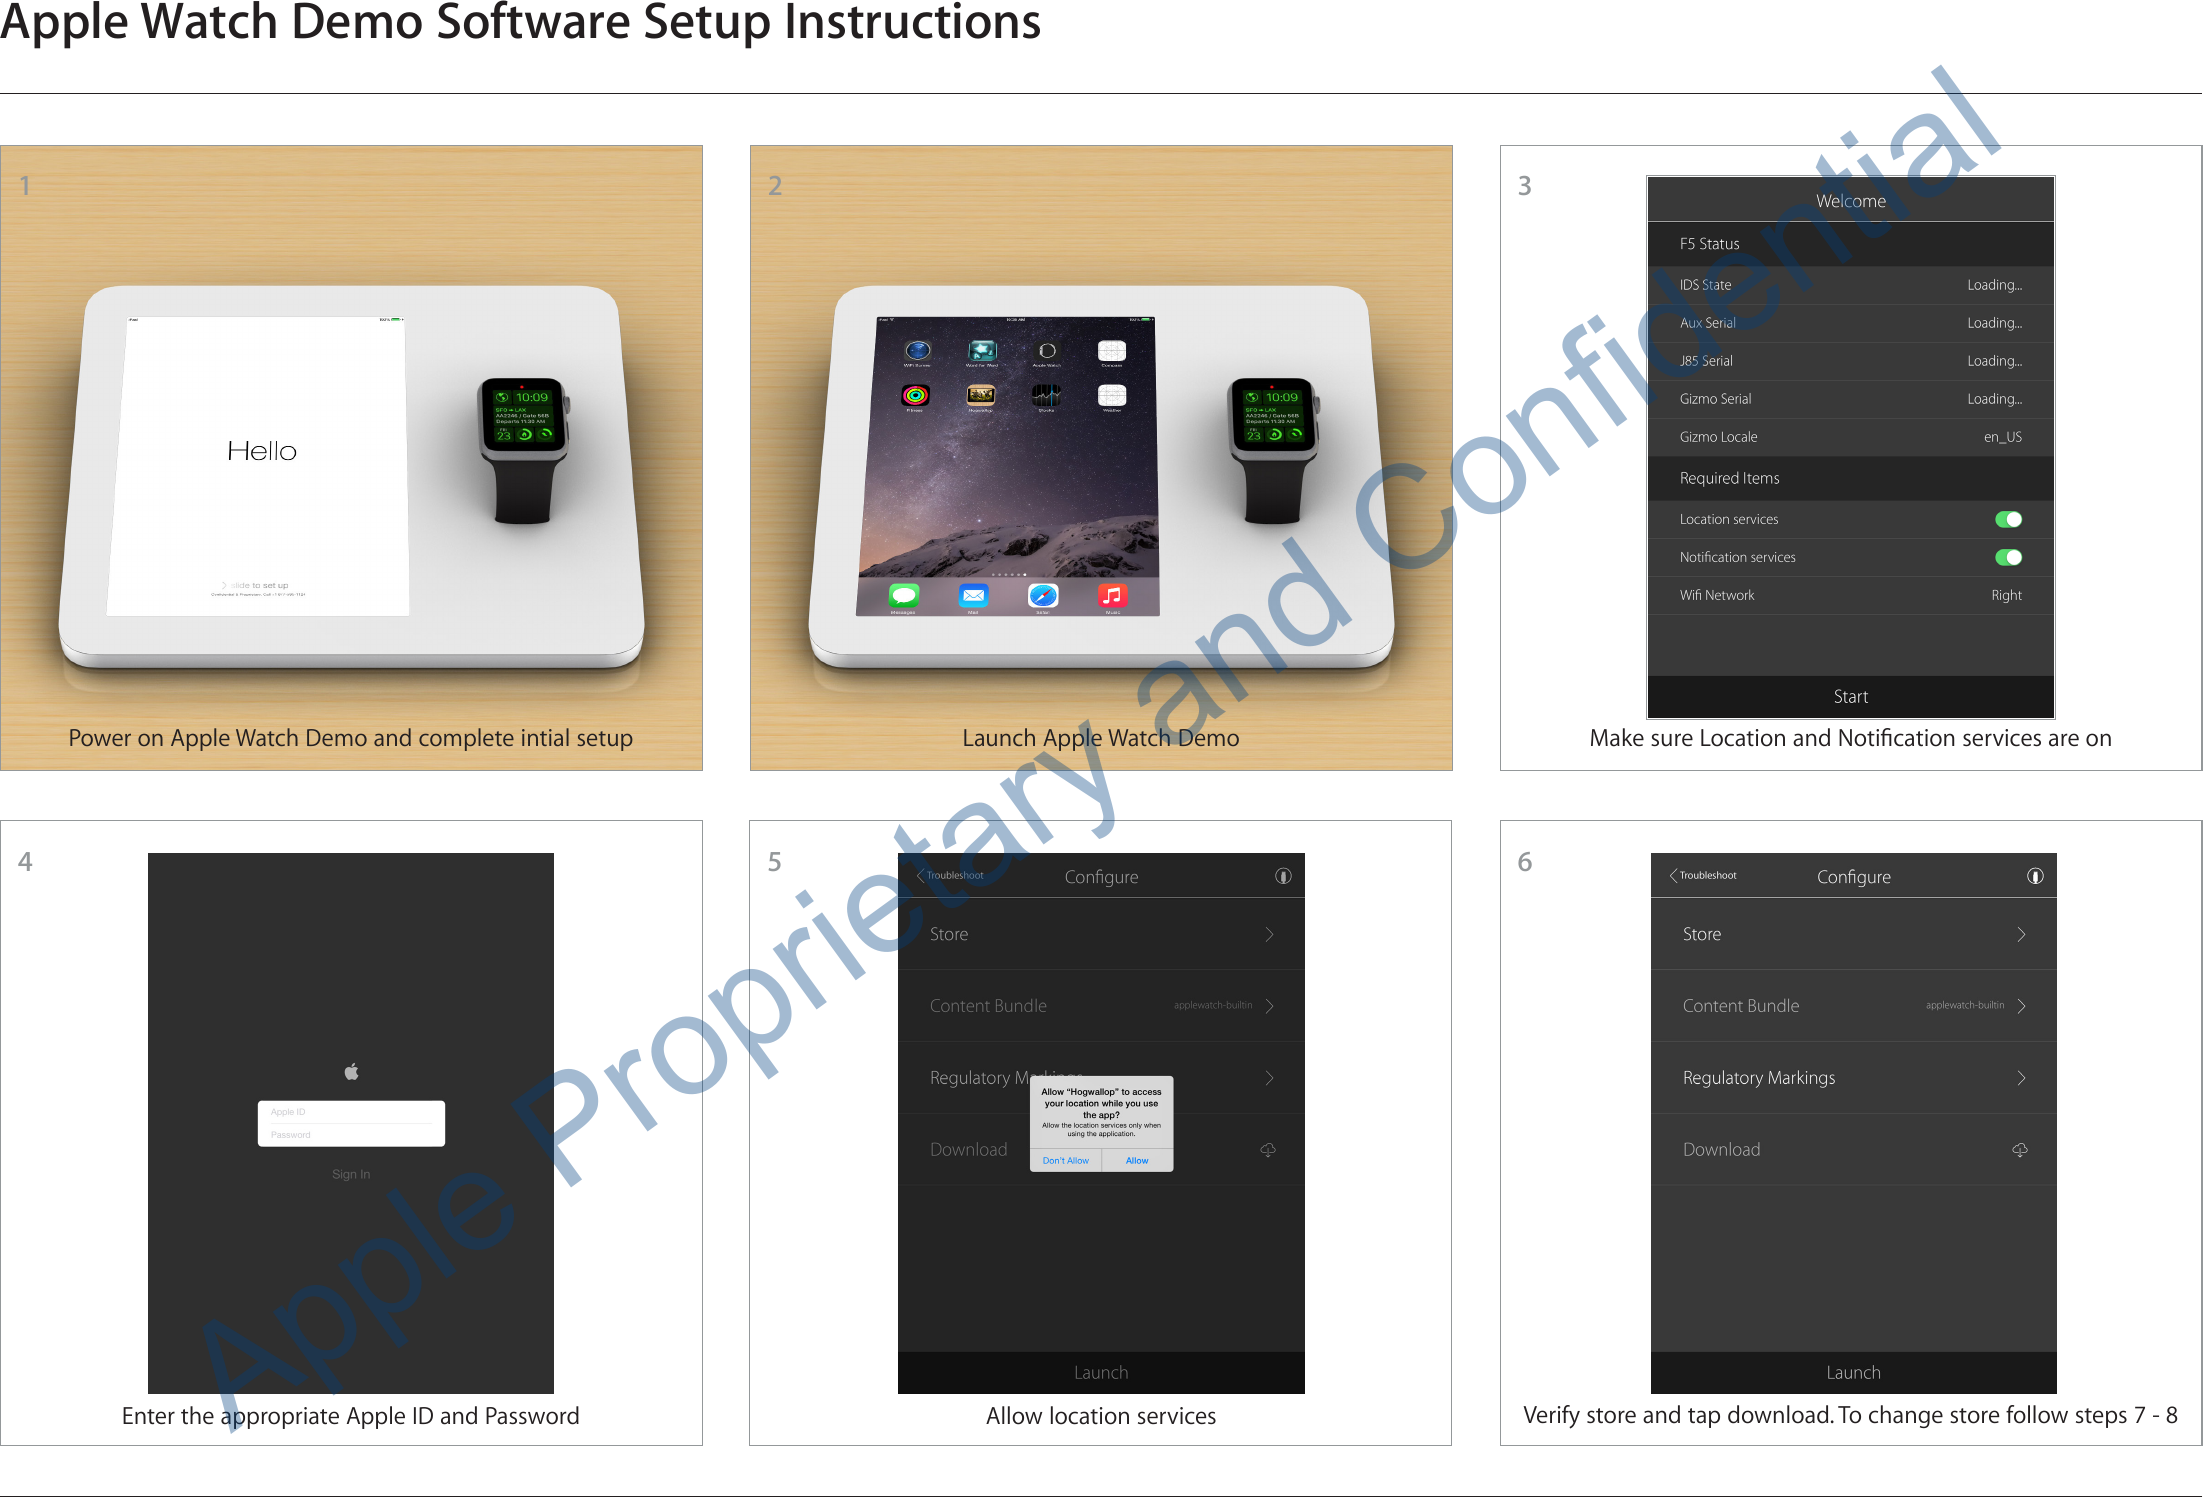 3Apple Watch Demo Software Setup Instructions54216Power on Apple Watch Demo and complete intial setupEnter the appropriate Apple ID and PasswordLaunch Apple Watch DemoAllow location servicesMake sure Location and Notication services are onVerify store and tap download. To change store follow steps 7 - 8Apple Proprietary and Confidential